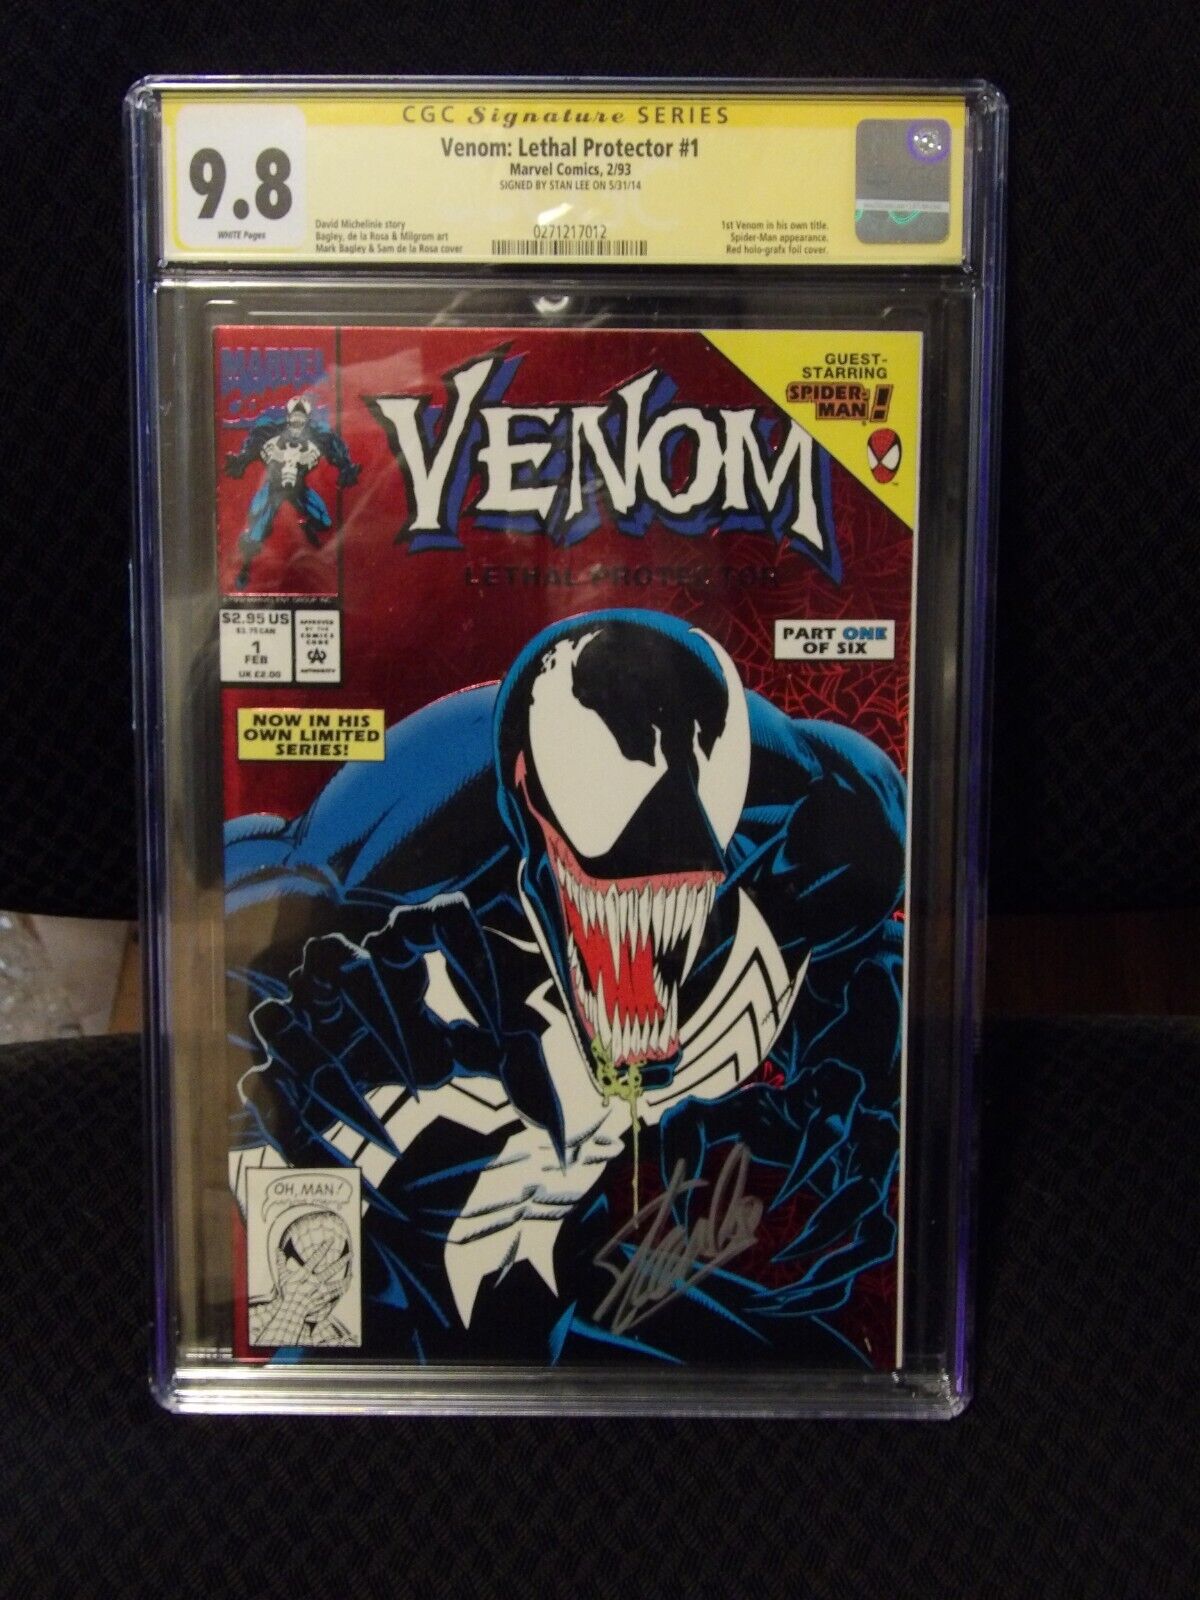 VENOM LETHAL PROTECTOR 1 CGC 98 SIGNED BY STAN LEE